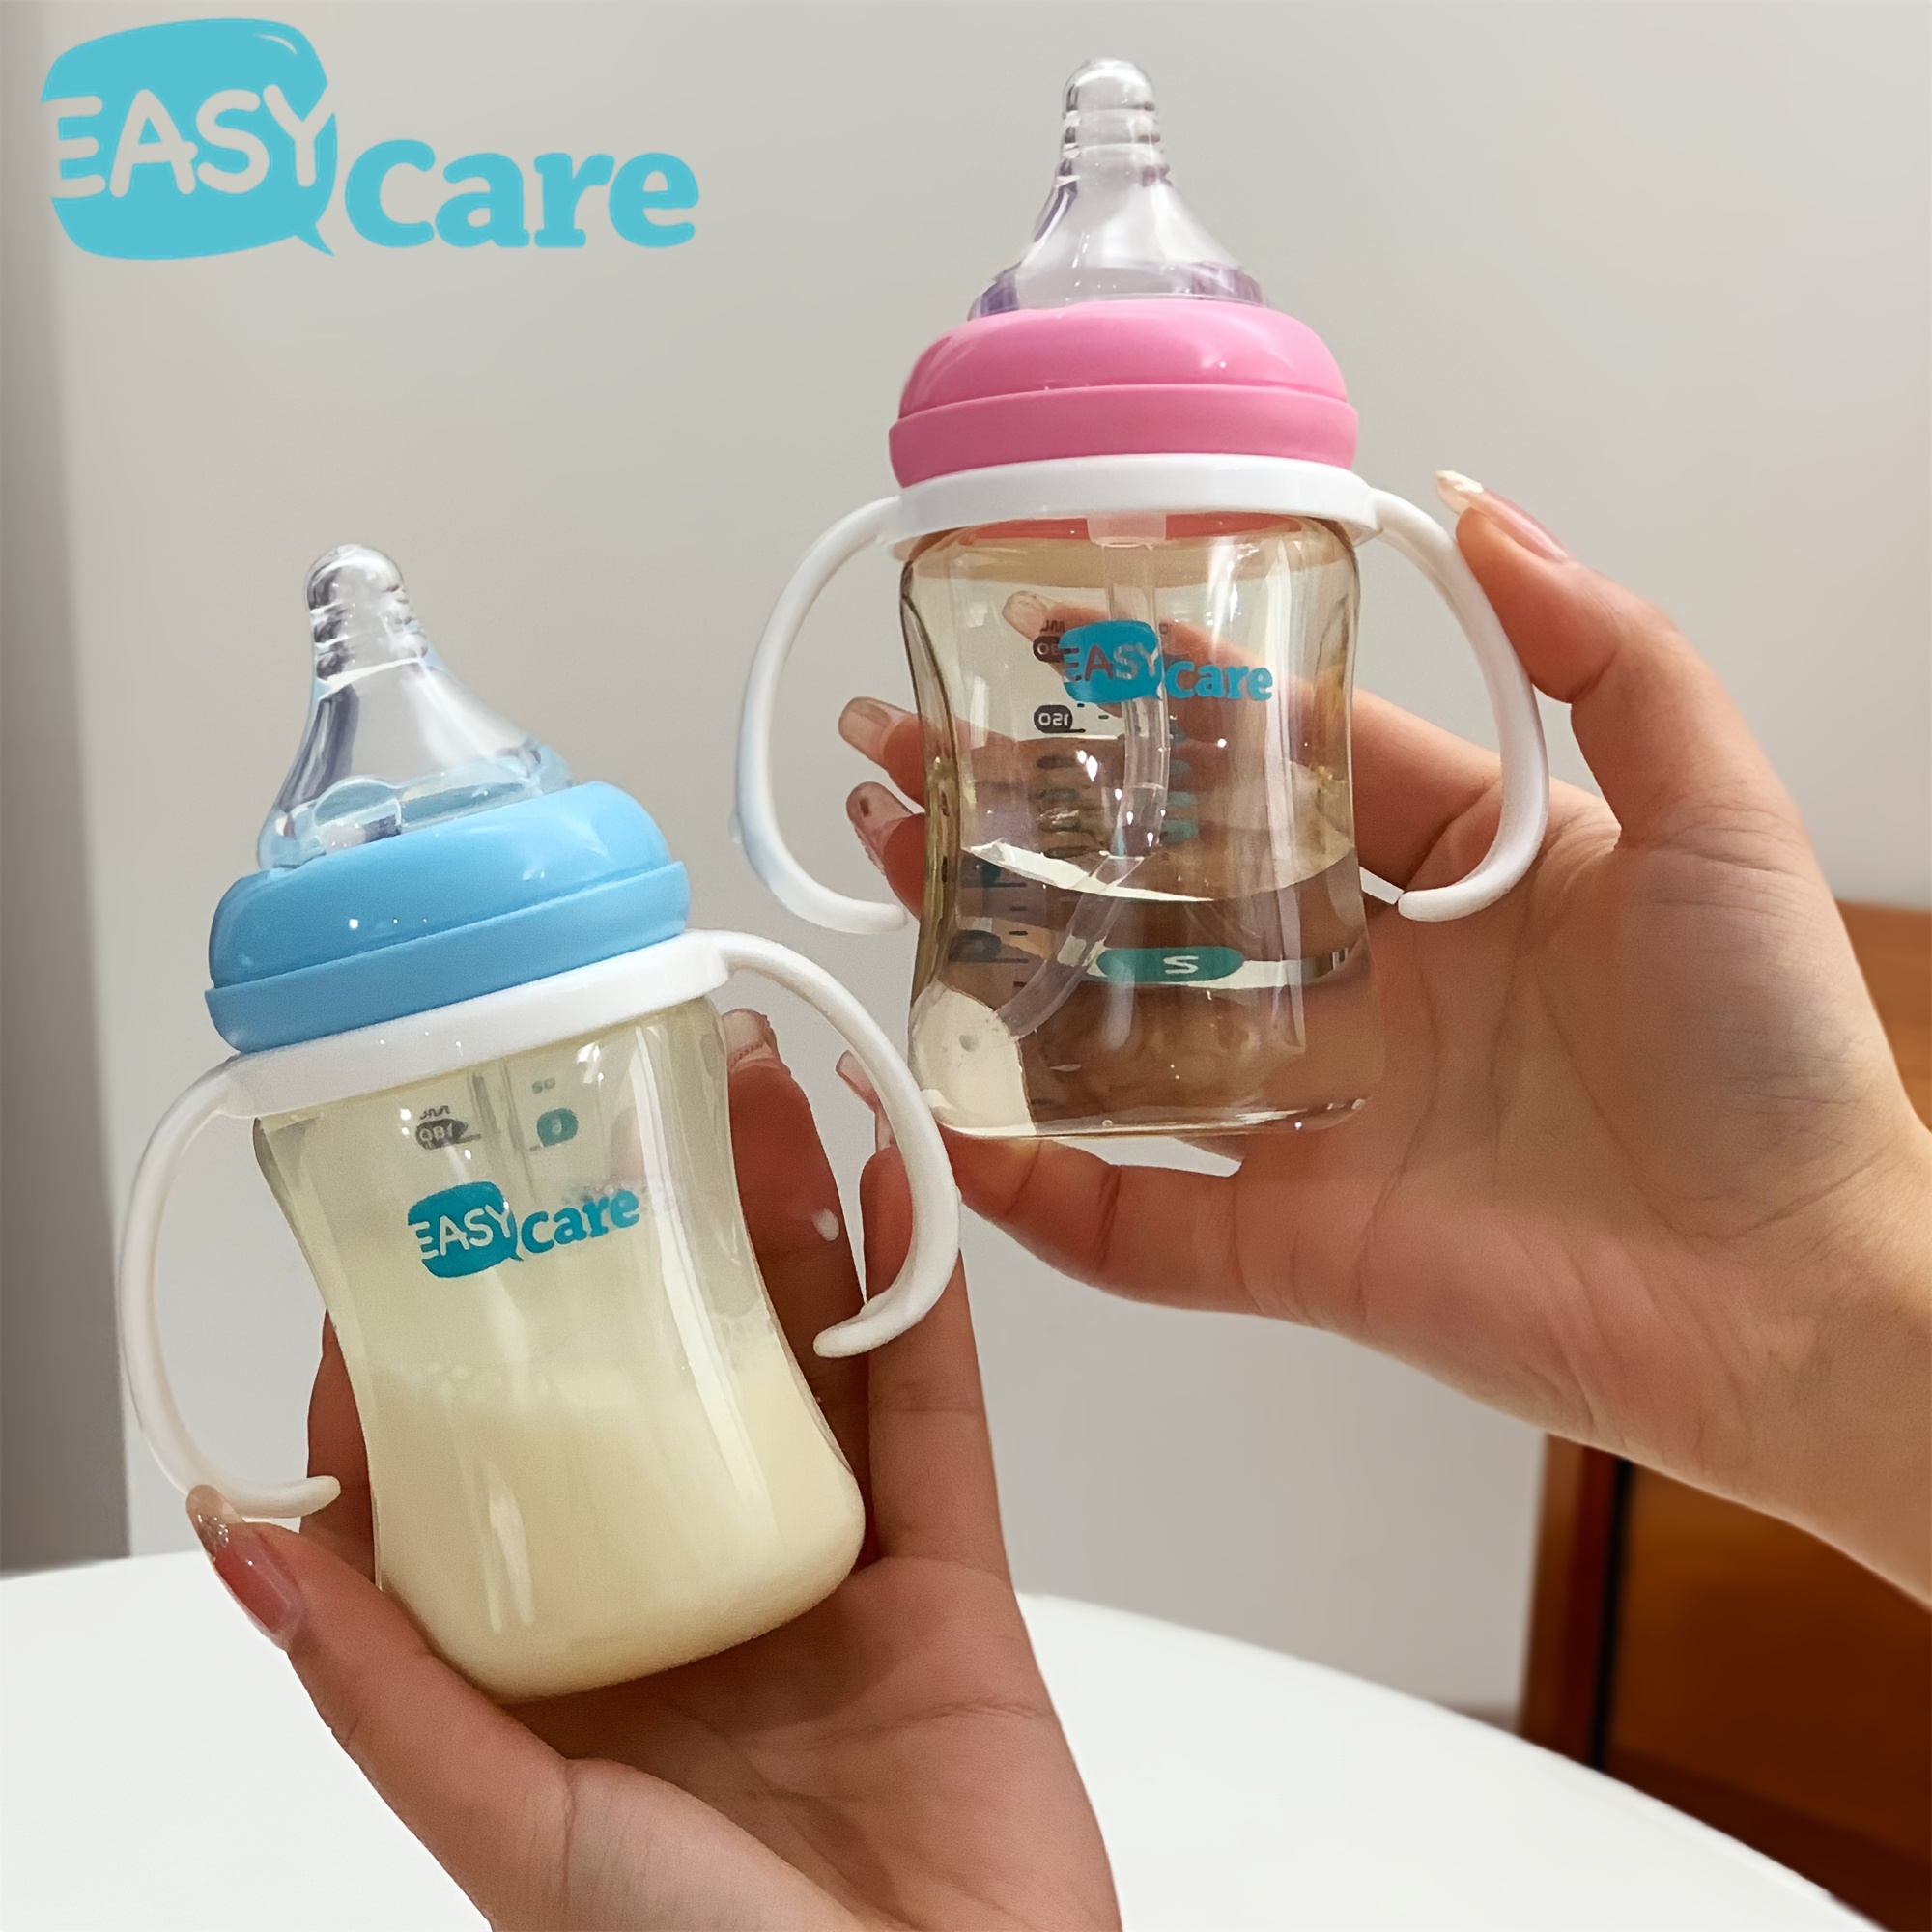 

180ml Milk Bottle Baby Weaning Ppsu Anti Inflation Cup Milk Bottle Silicone Tape Handle Straw Drinking Milk Bottle Automatic Nursing Bottle Children's Learning Cup Water Cup Safe And Healthy Bpa Free